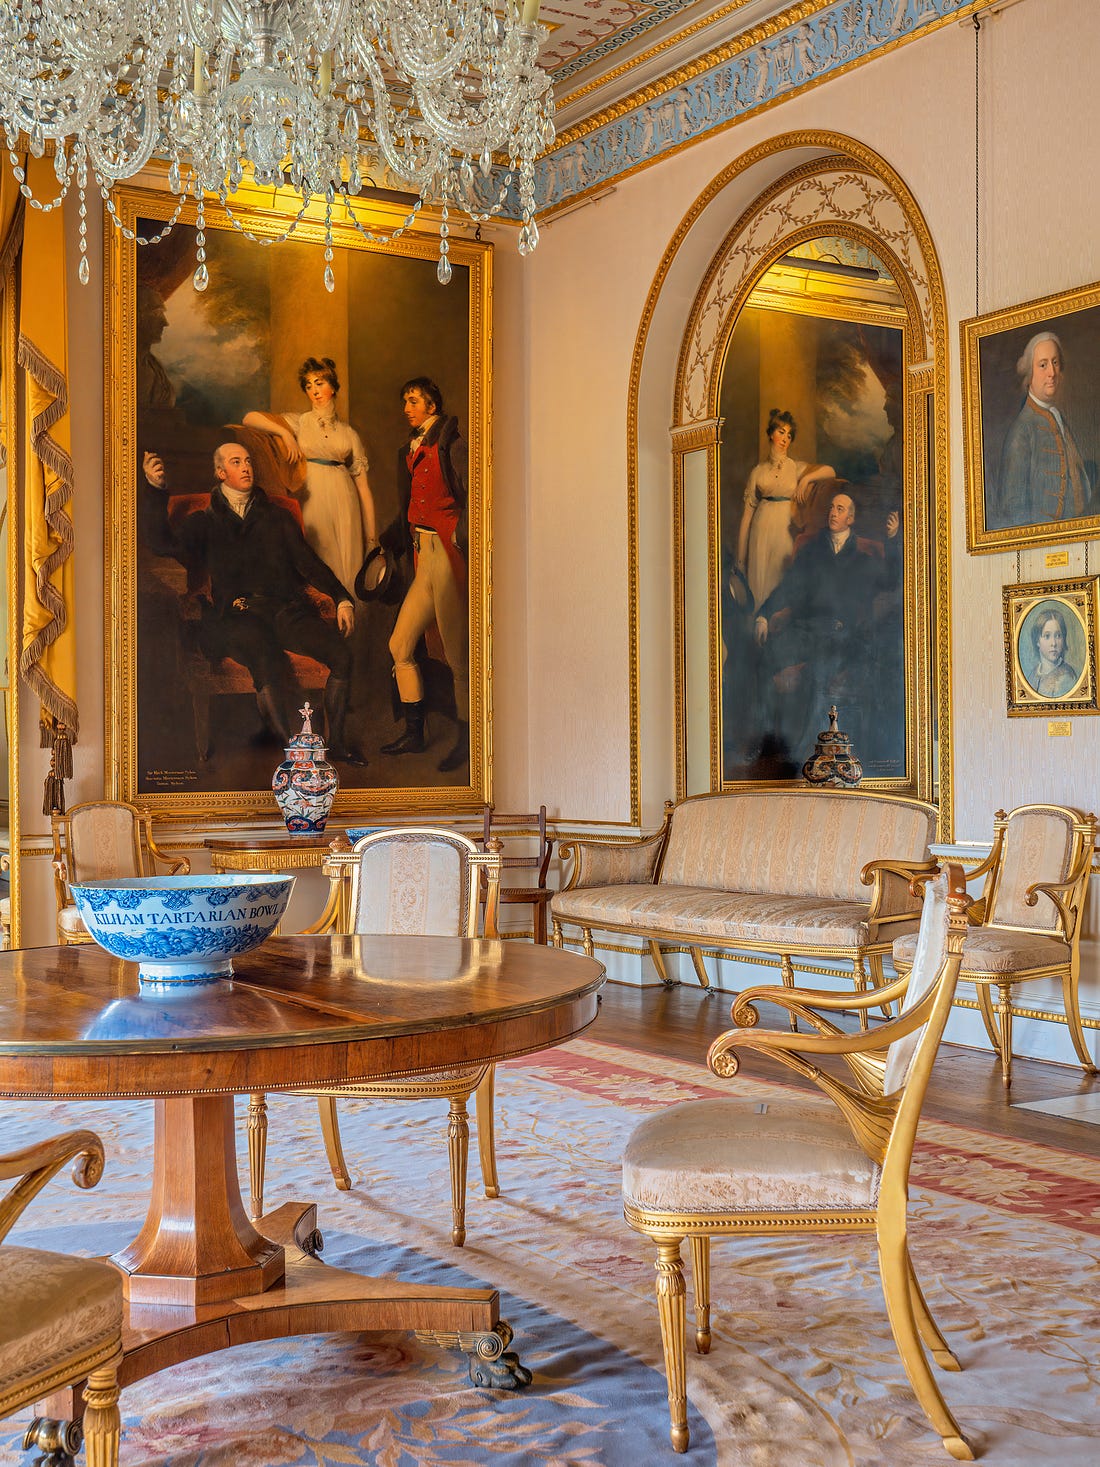 Shown here, a Regency salon right out of Pride and Prrejudice. Hooray, it’s time for a Regency-era family gathering: Just beware of Sir Walter, Sir Thomas, Lucy Steele, Lady Catherine, and actually just about everyone in the house. Otherwise you should be good. Photo: Stuartan | Dreamstime.com 